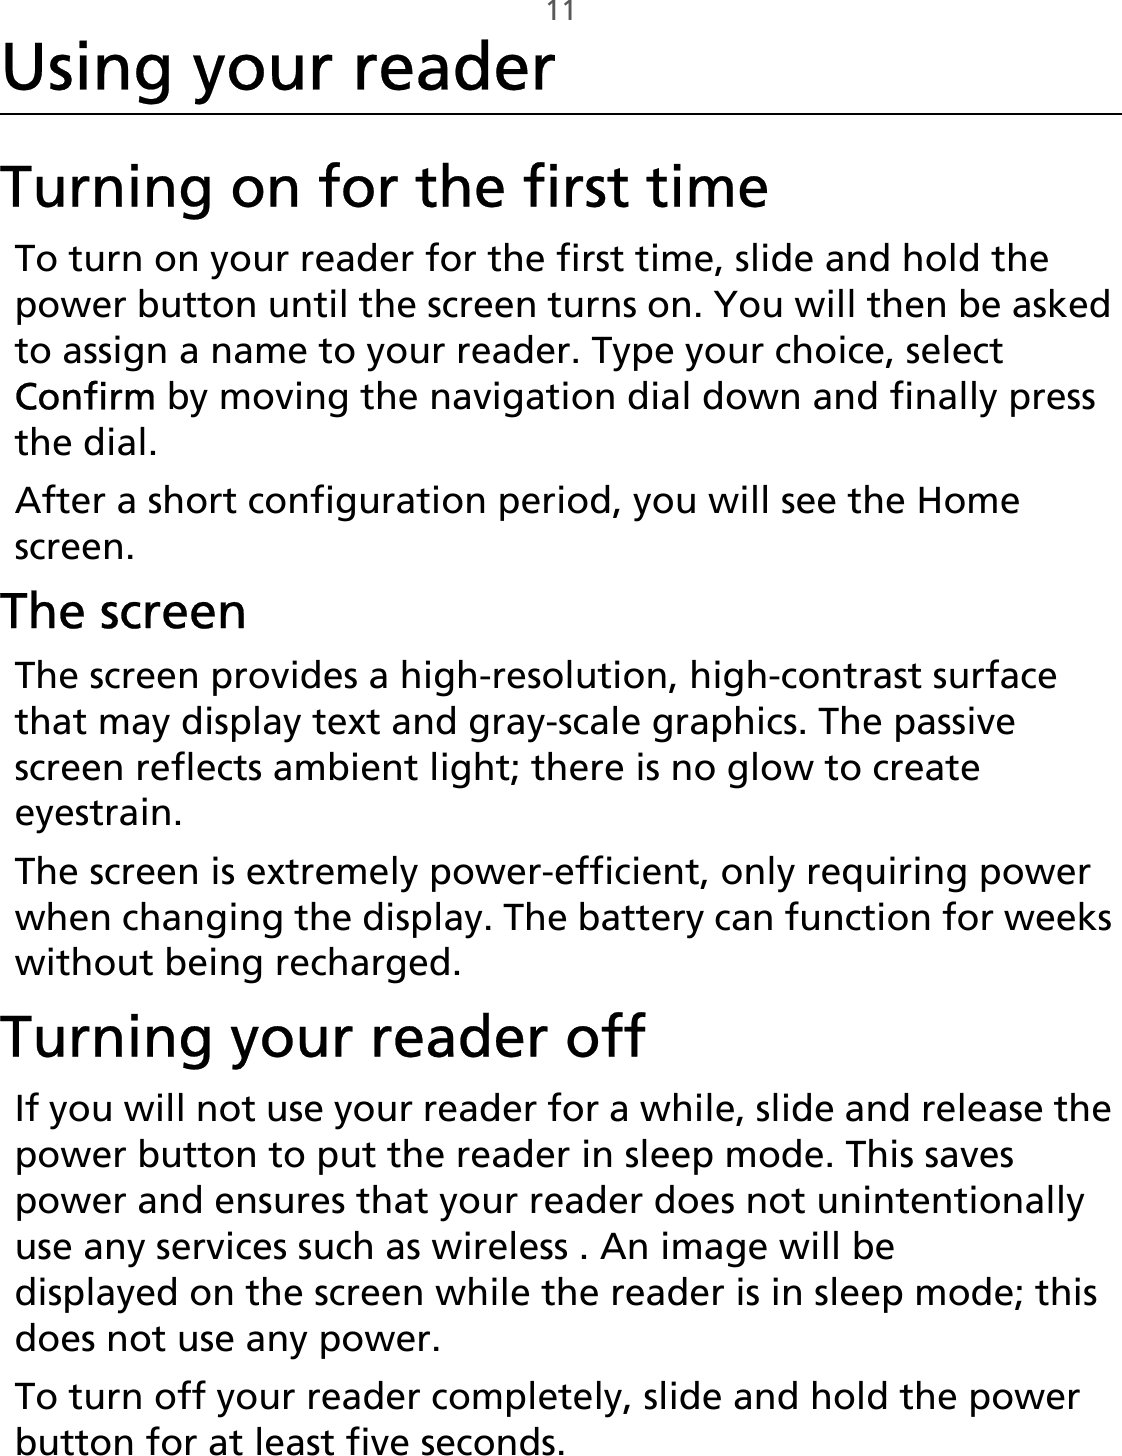 11Using your readerTurning on for the first timeTo turn on your reader for the first time, slide and hold the power button until the screen turns on. You will then be asked to assign a name to your reader. Type your choice, select Confirm by moving the navigation dial down and finally press the dial.After a short configuration period, you will see the Home screen. The screenThe screen provides a high-resolution, high-contrast surface that may display text and gray-scale graphics. The passive screen reflects ambient light; there is no glow to create eyestrain.The screen is extremely power-efficient, only requiring power when changing the display. The battery can function for weeks without being recharged.Turning your reader offIf you will not use your reader for a while, slide and release the power button to put the reader in sleep mode. This saves power and ensures that your reader does not unintentionally use any services such as wireless . An image will be displayed on the screen while the reader is in sleep mode; this does not use any power.To turn off your reader completely, slide and hold the power button for at least five seconds.